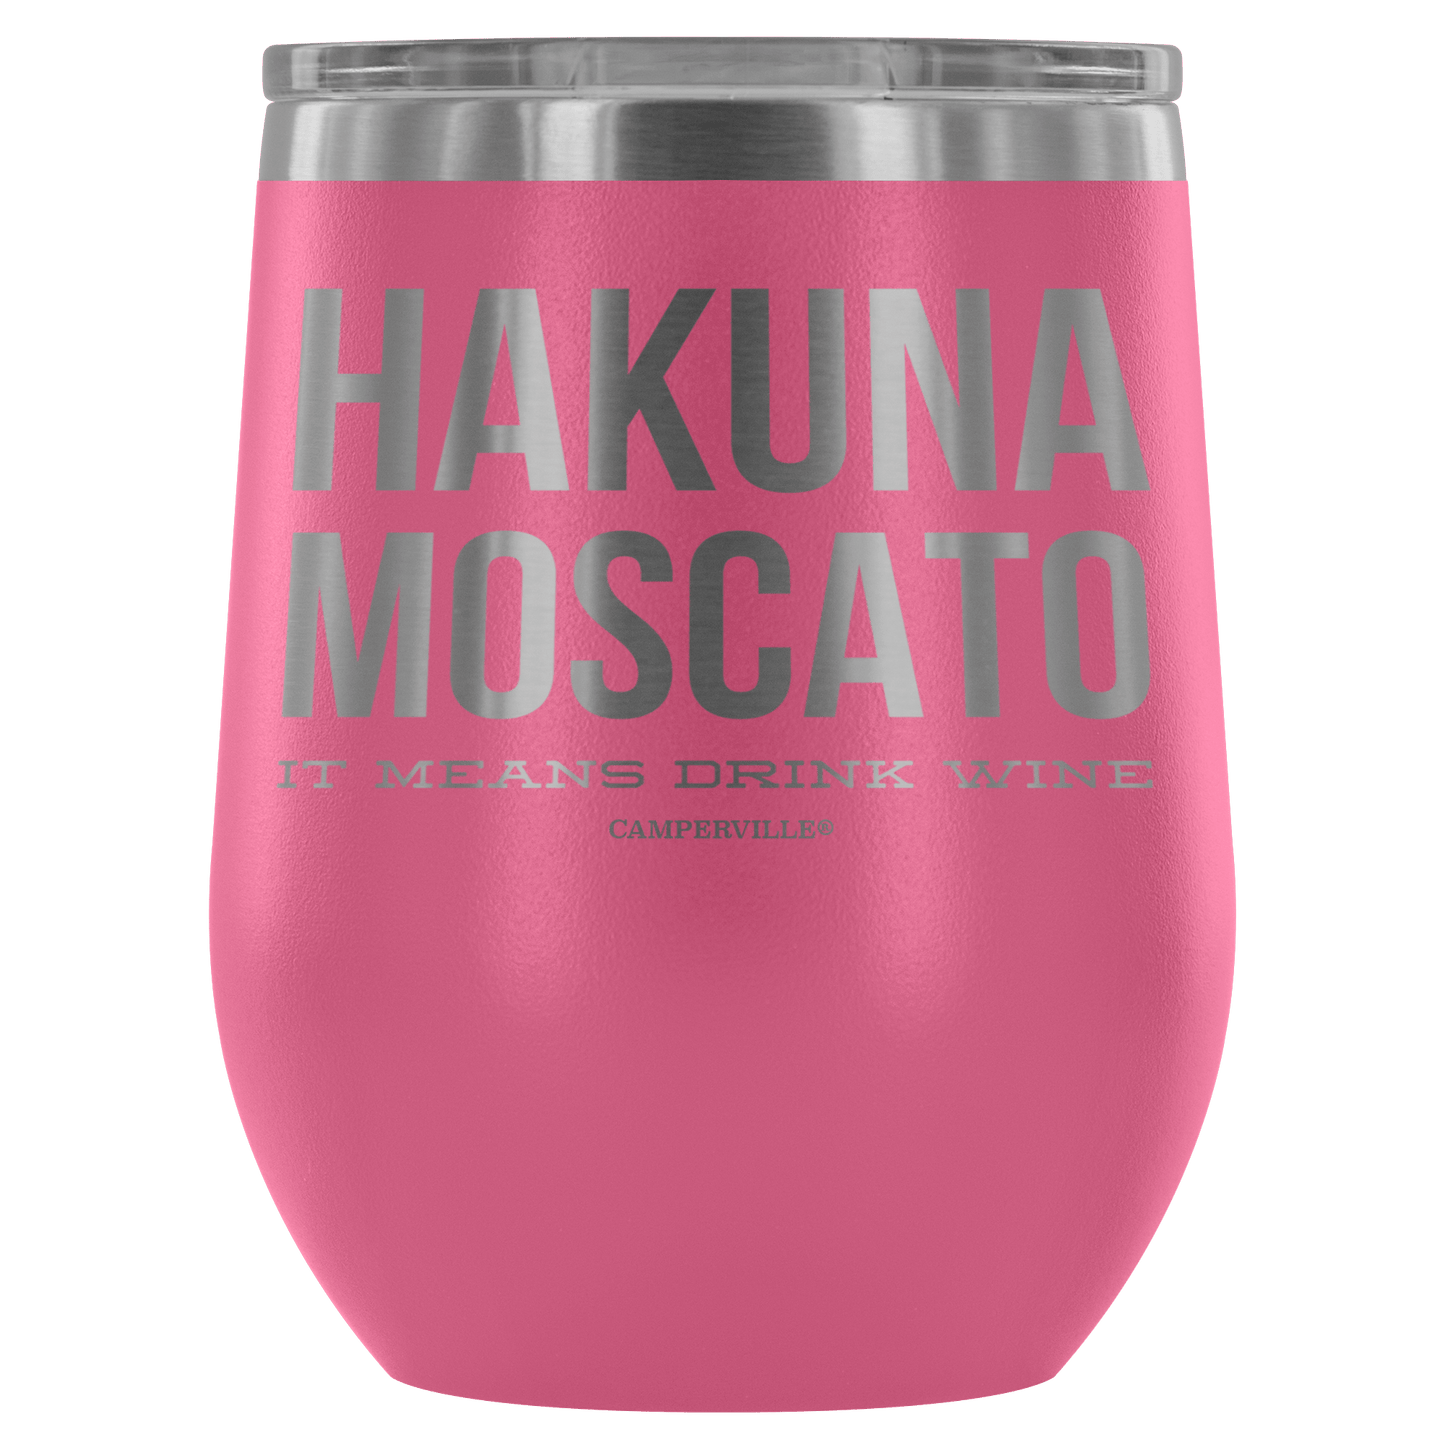 "Hakuna Moscato - It Means Drink Wine" Stemless Wine Cup